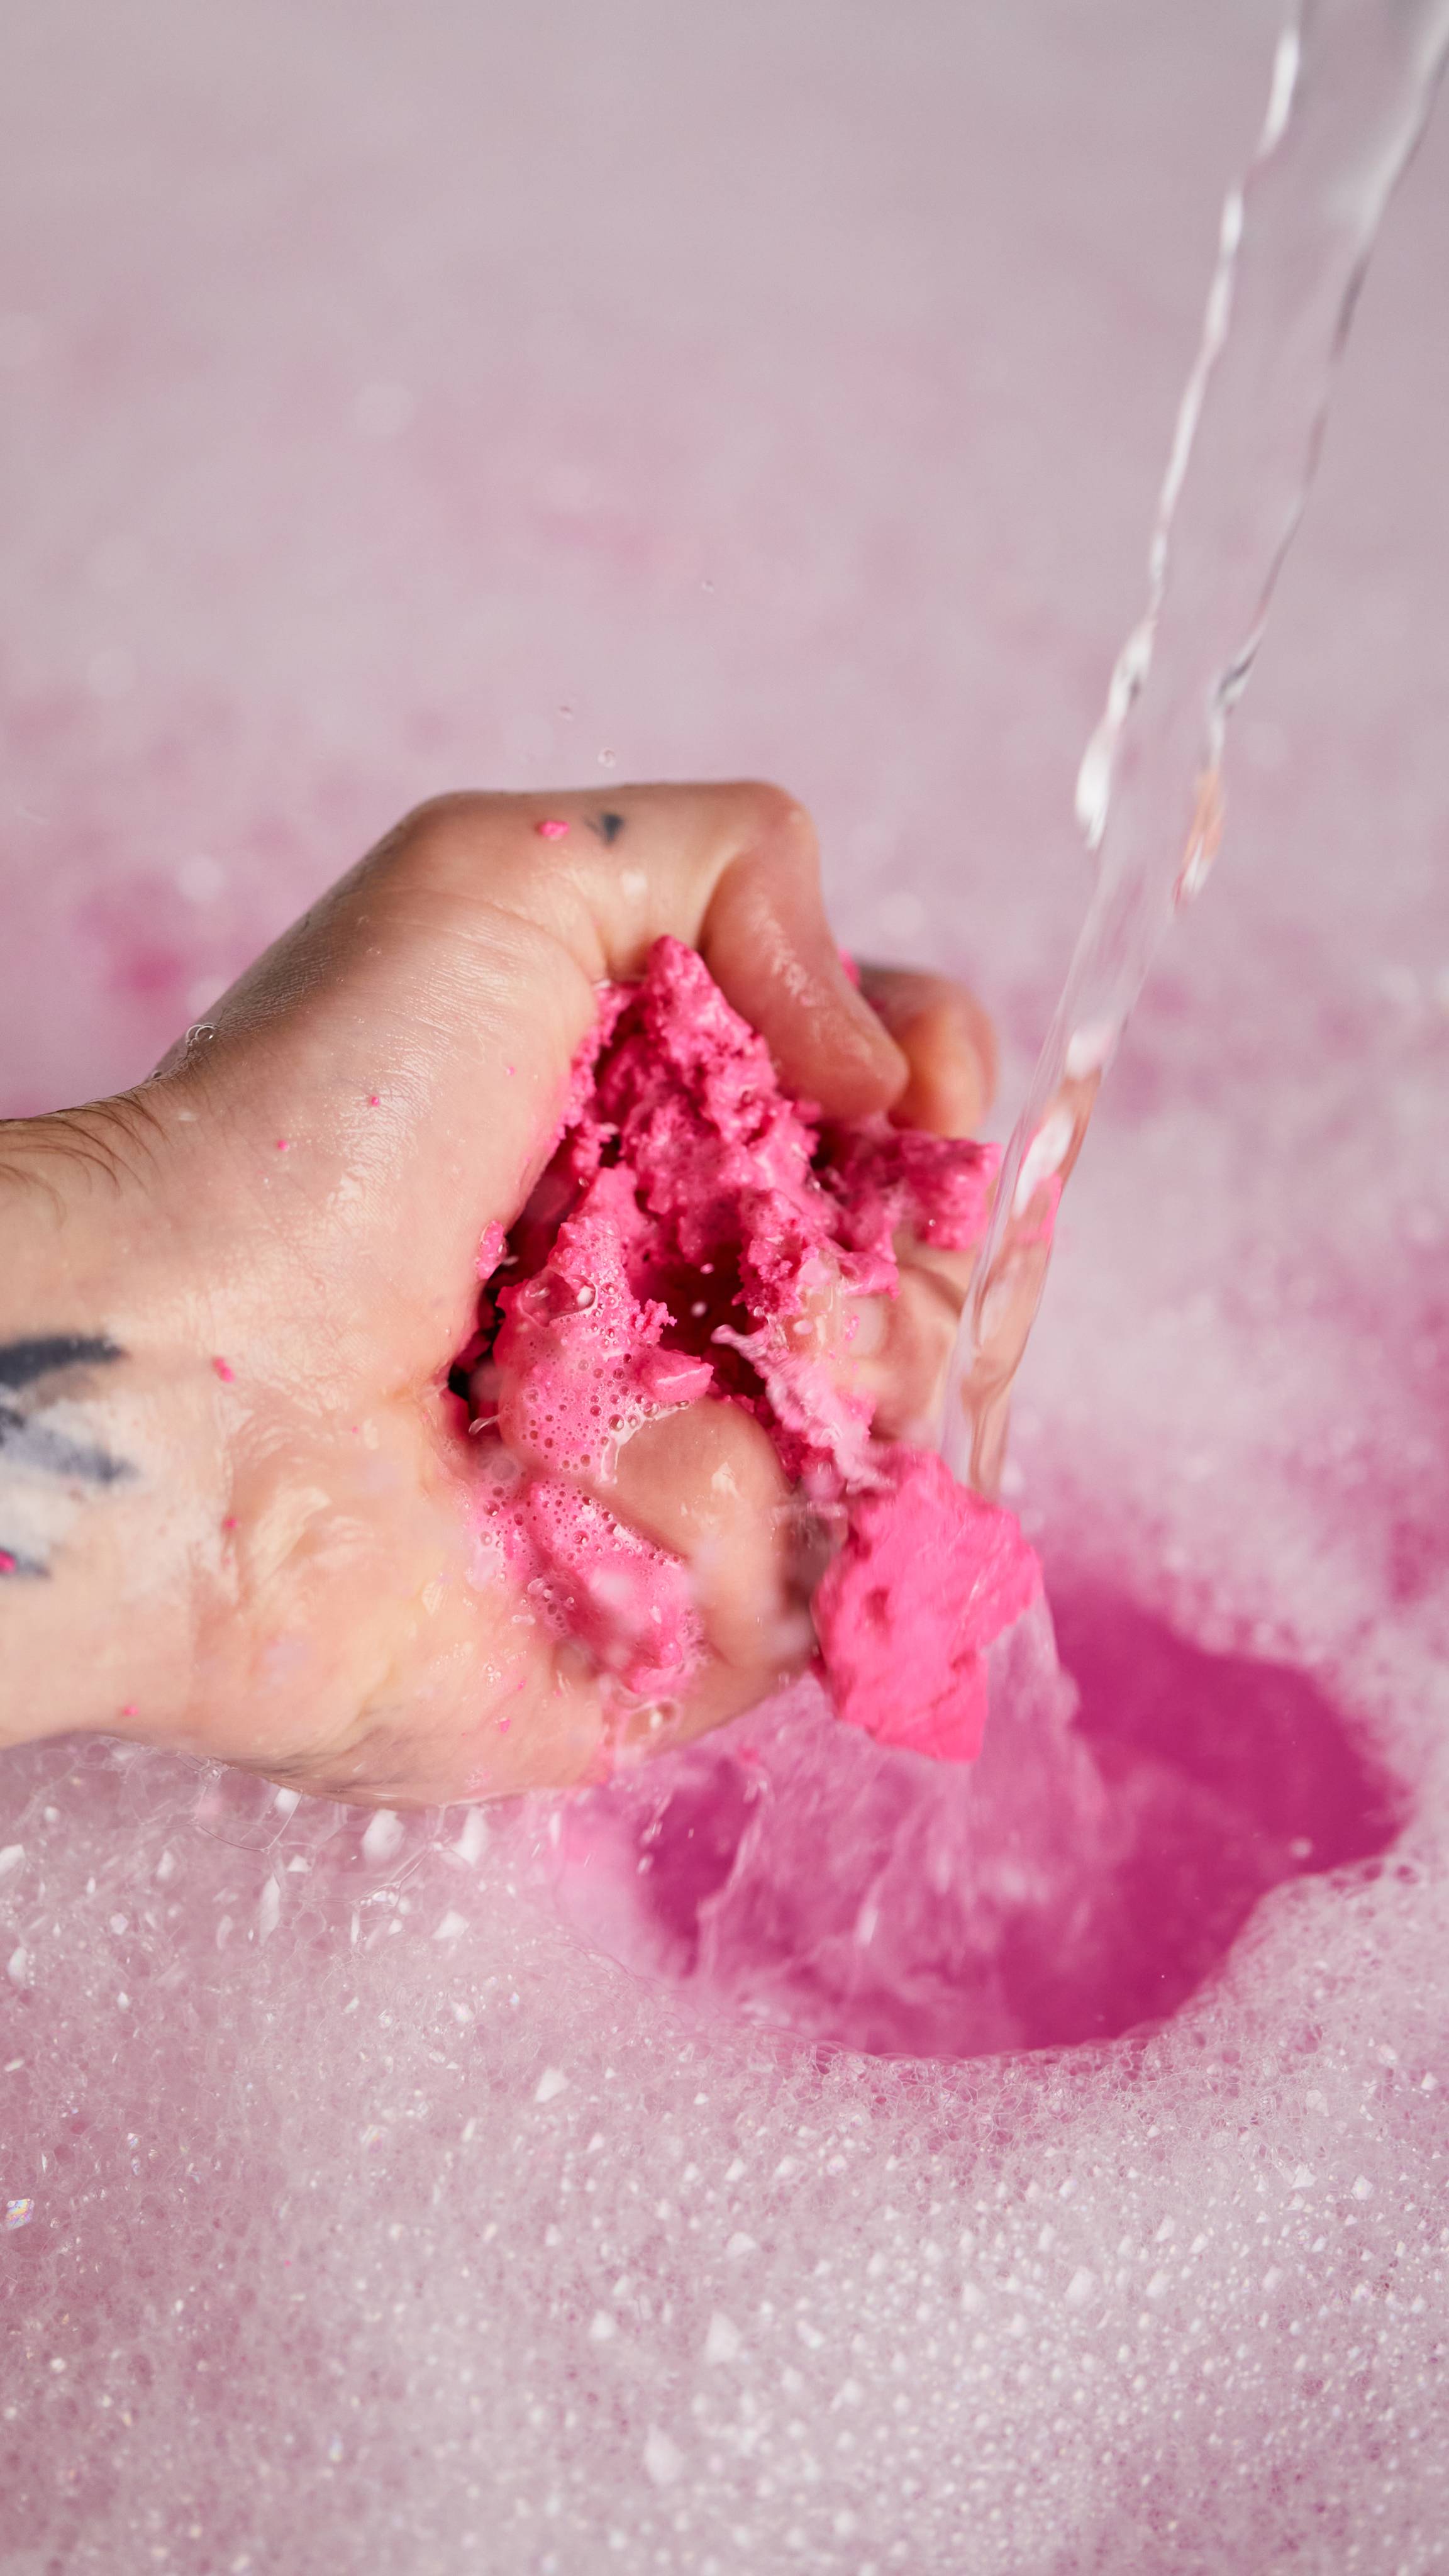 Image shows the model gently crumbling the pink bubble bar under running water in front of bubbly, pink bath water.